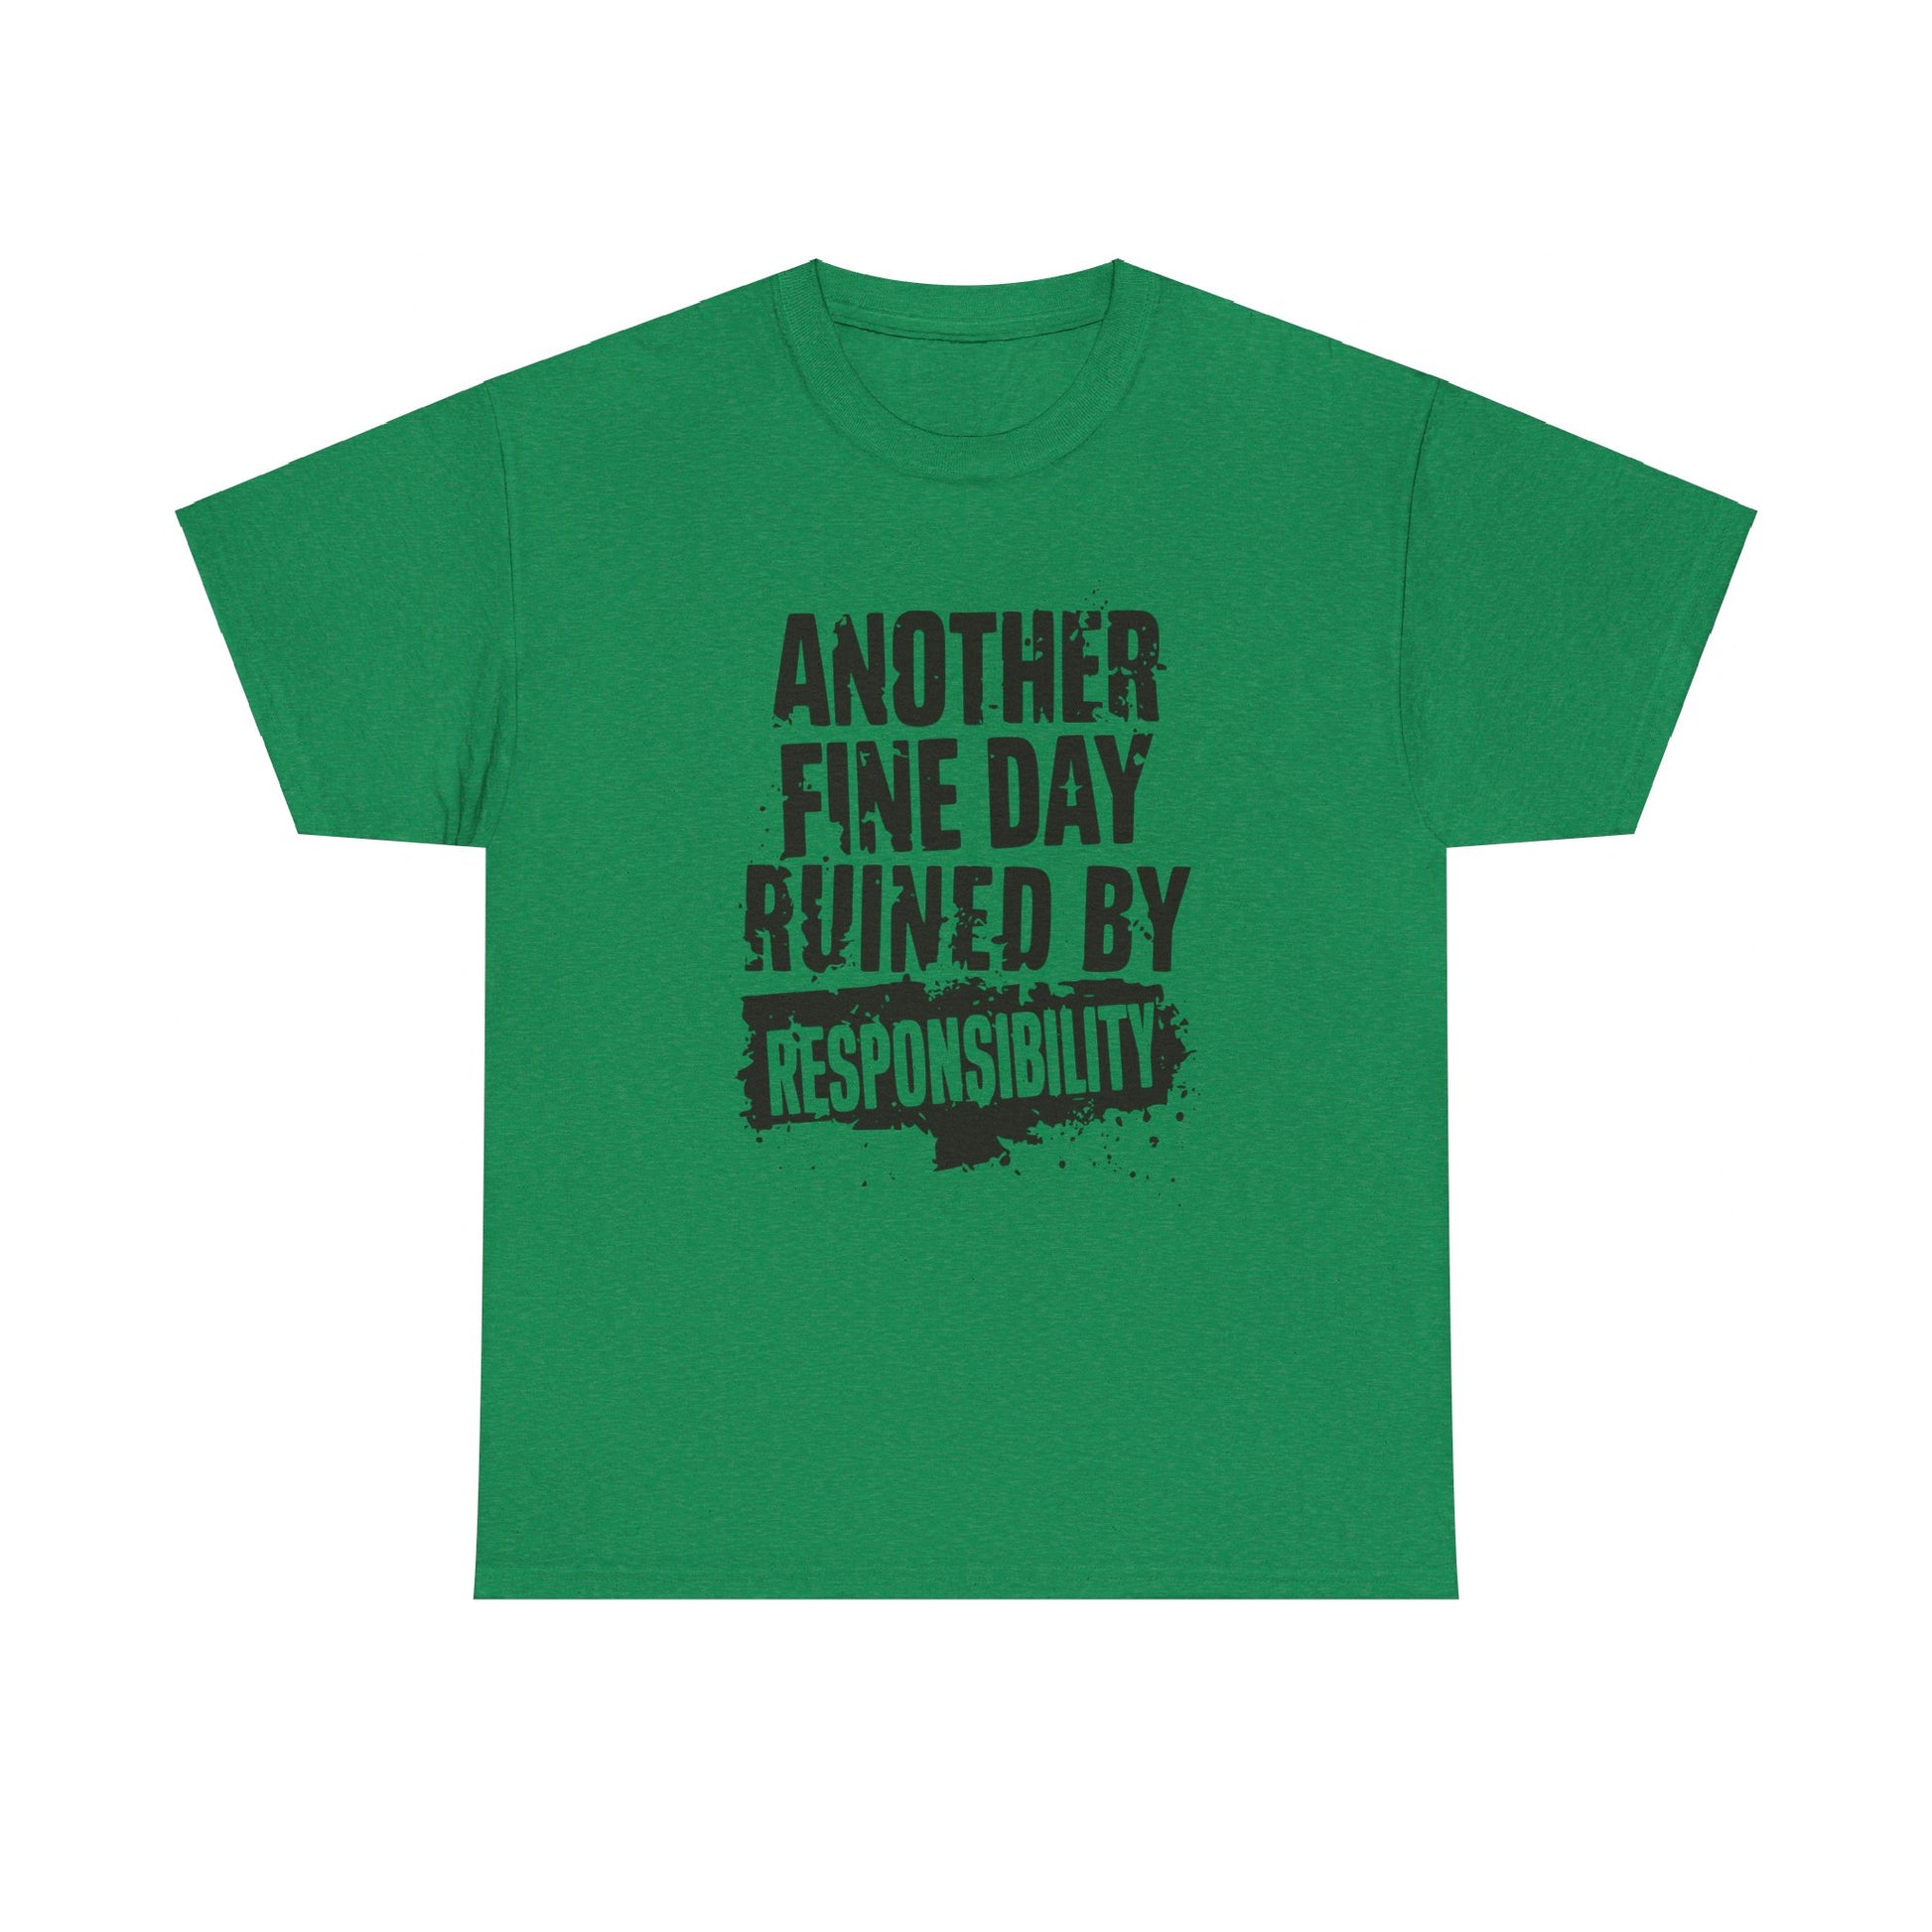 "Another Fine Day Ruined by Responsibility Distressed Text Tee"